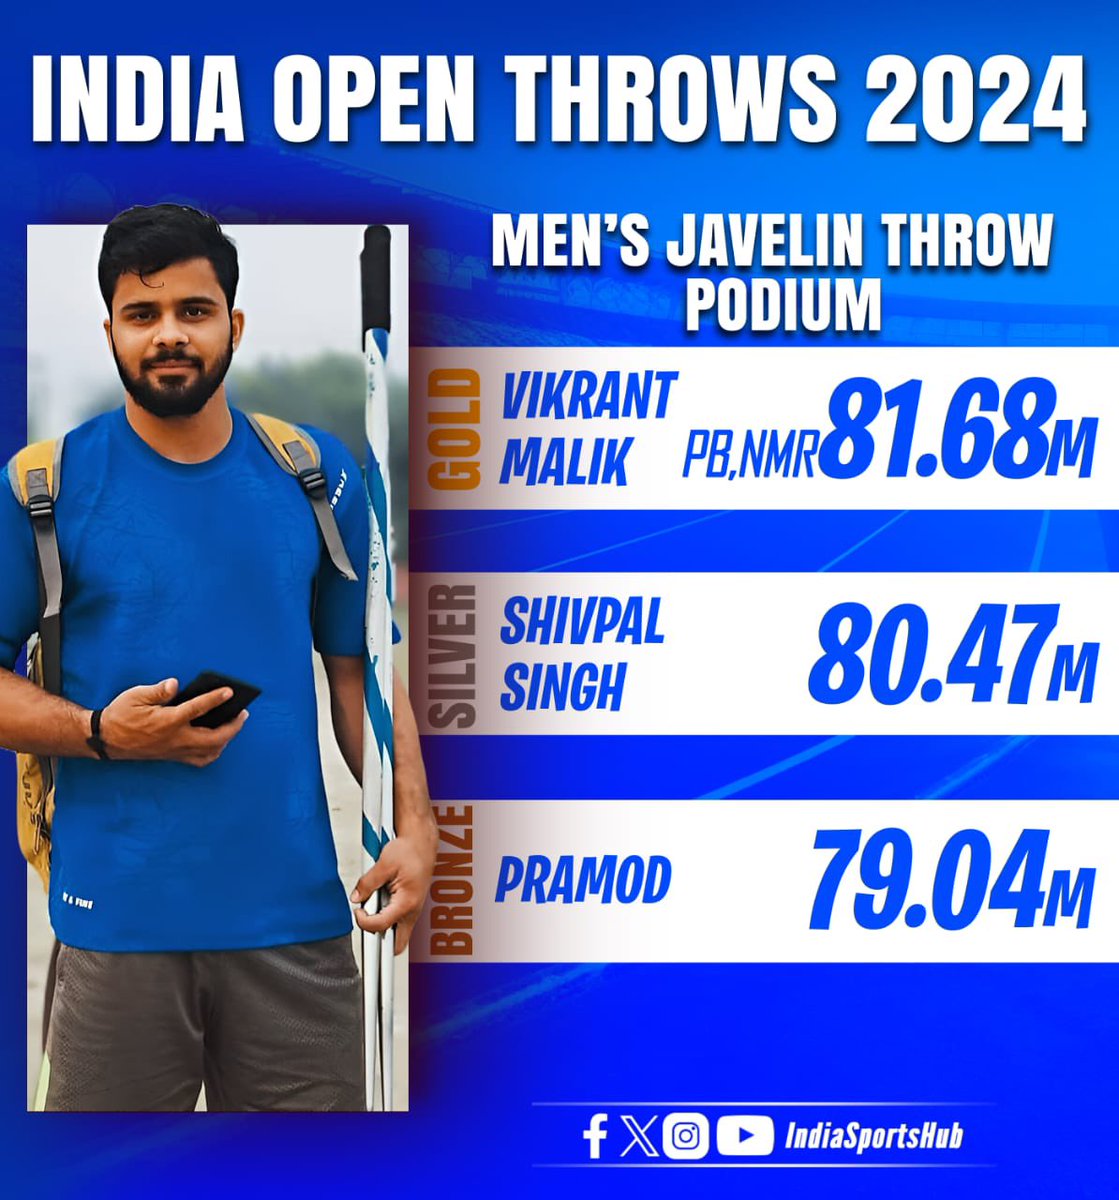 VIKRANT 8️⃣1️⃣.6️⃣8️⃣ SHIVPAL 8️⃣0️⃣.4️⃣7️⃣

What a Compelling Competition between as 2.5m covers the podium with 28 year Old doing a personal best to claim Gold Medal

#IndiaOpen #Throws